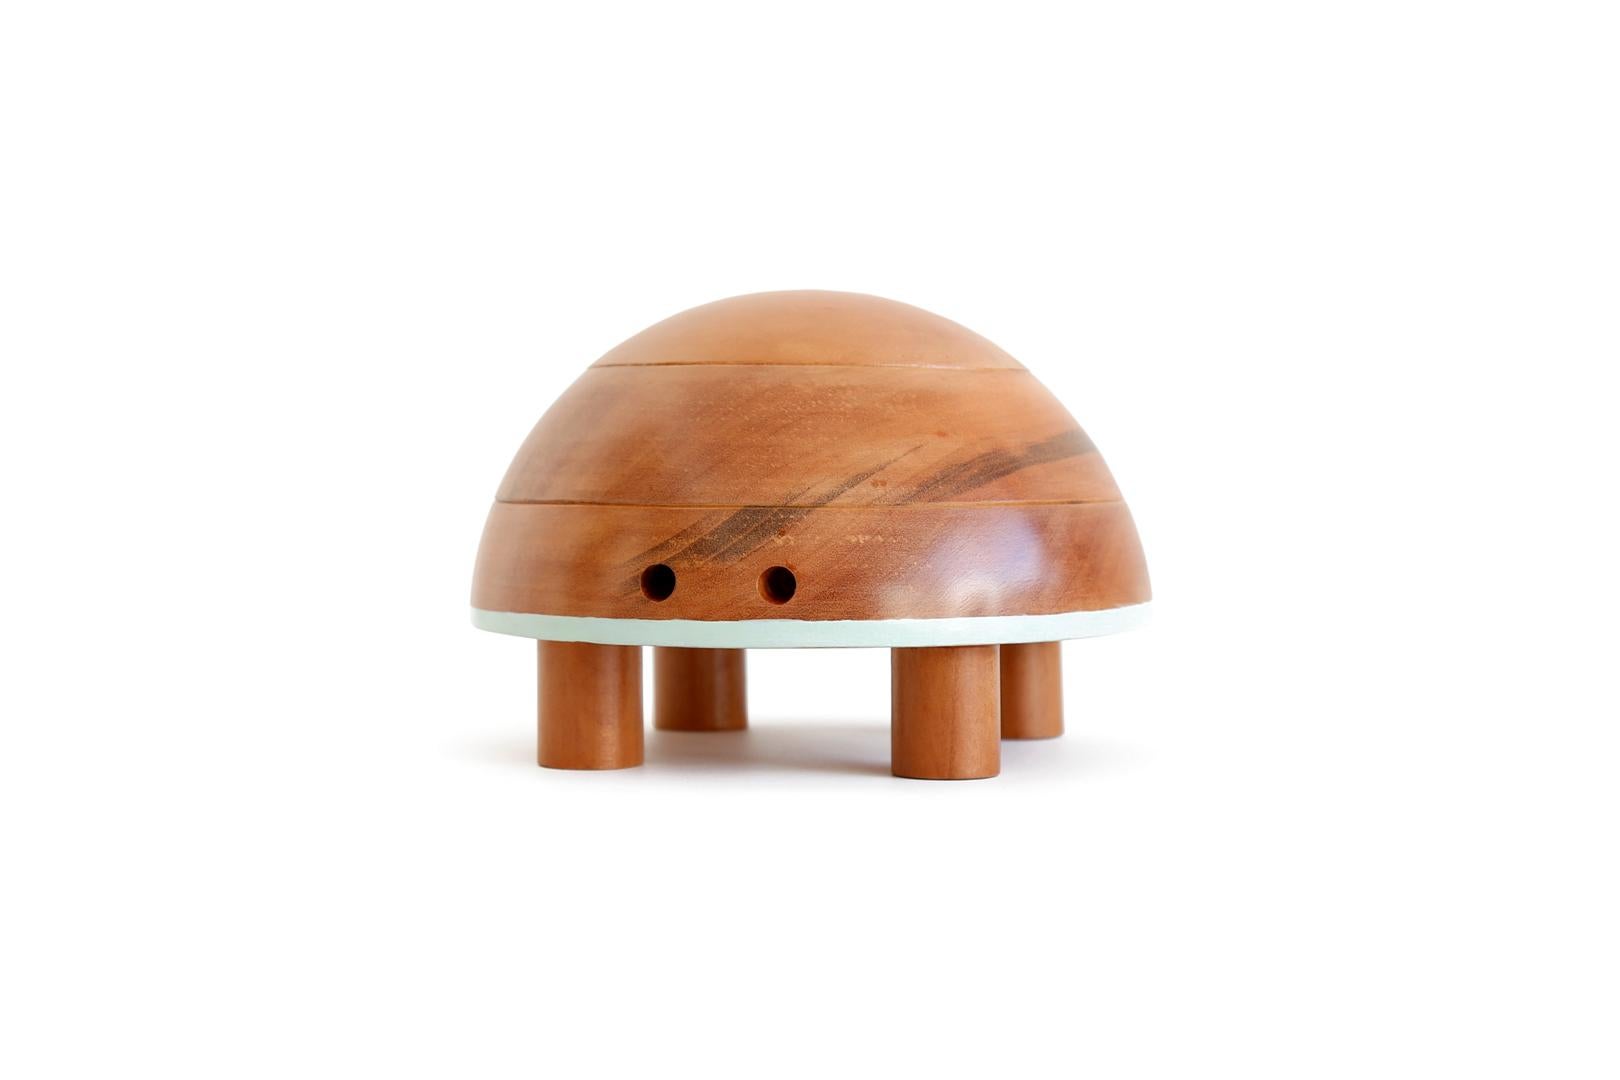 Wood Bichos do Brasil, Brazilian Contemporary Collectible and Decorative Objects For Sale